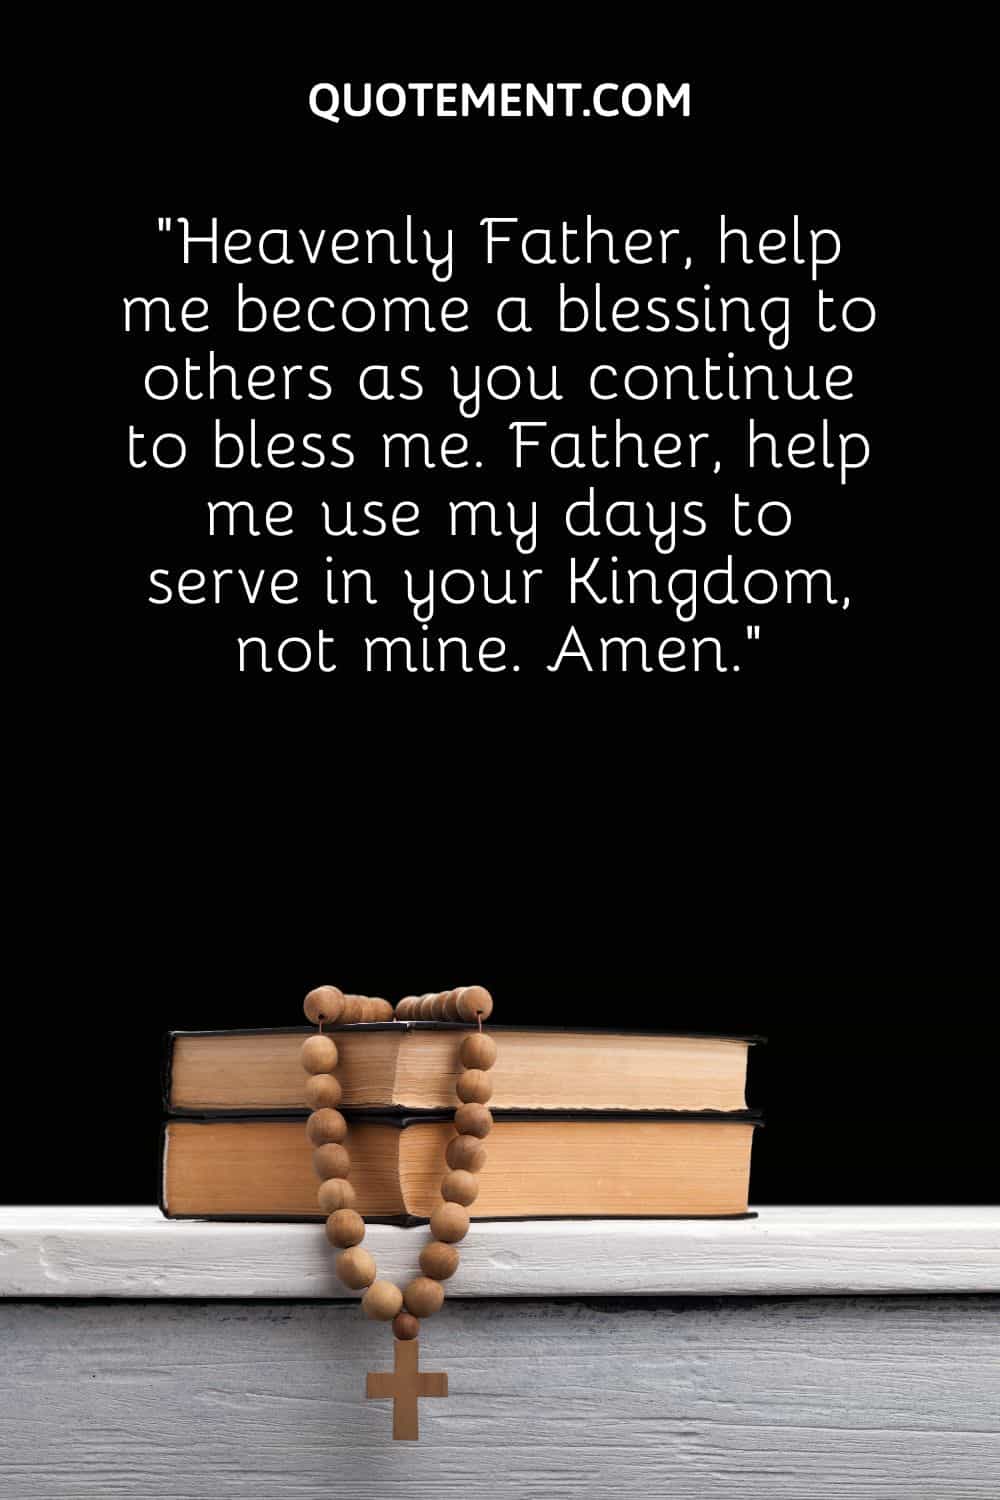 help me become a blessing to others as you continue to bless me